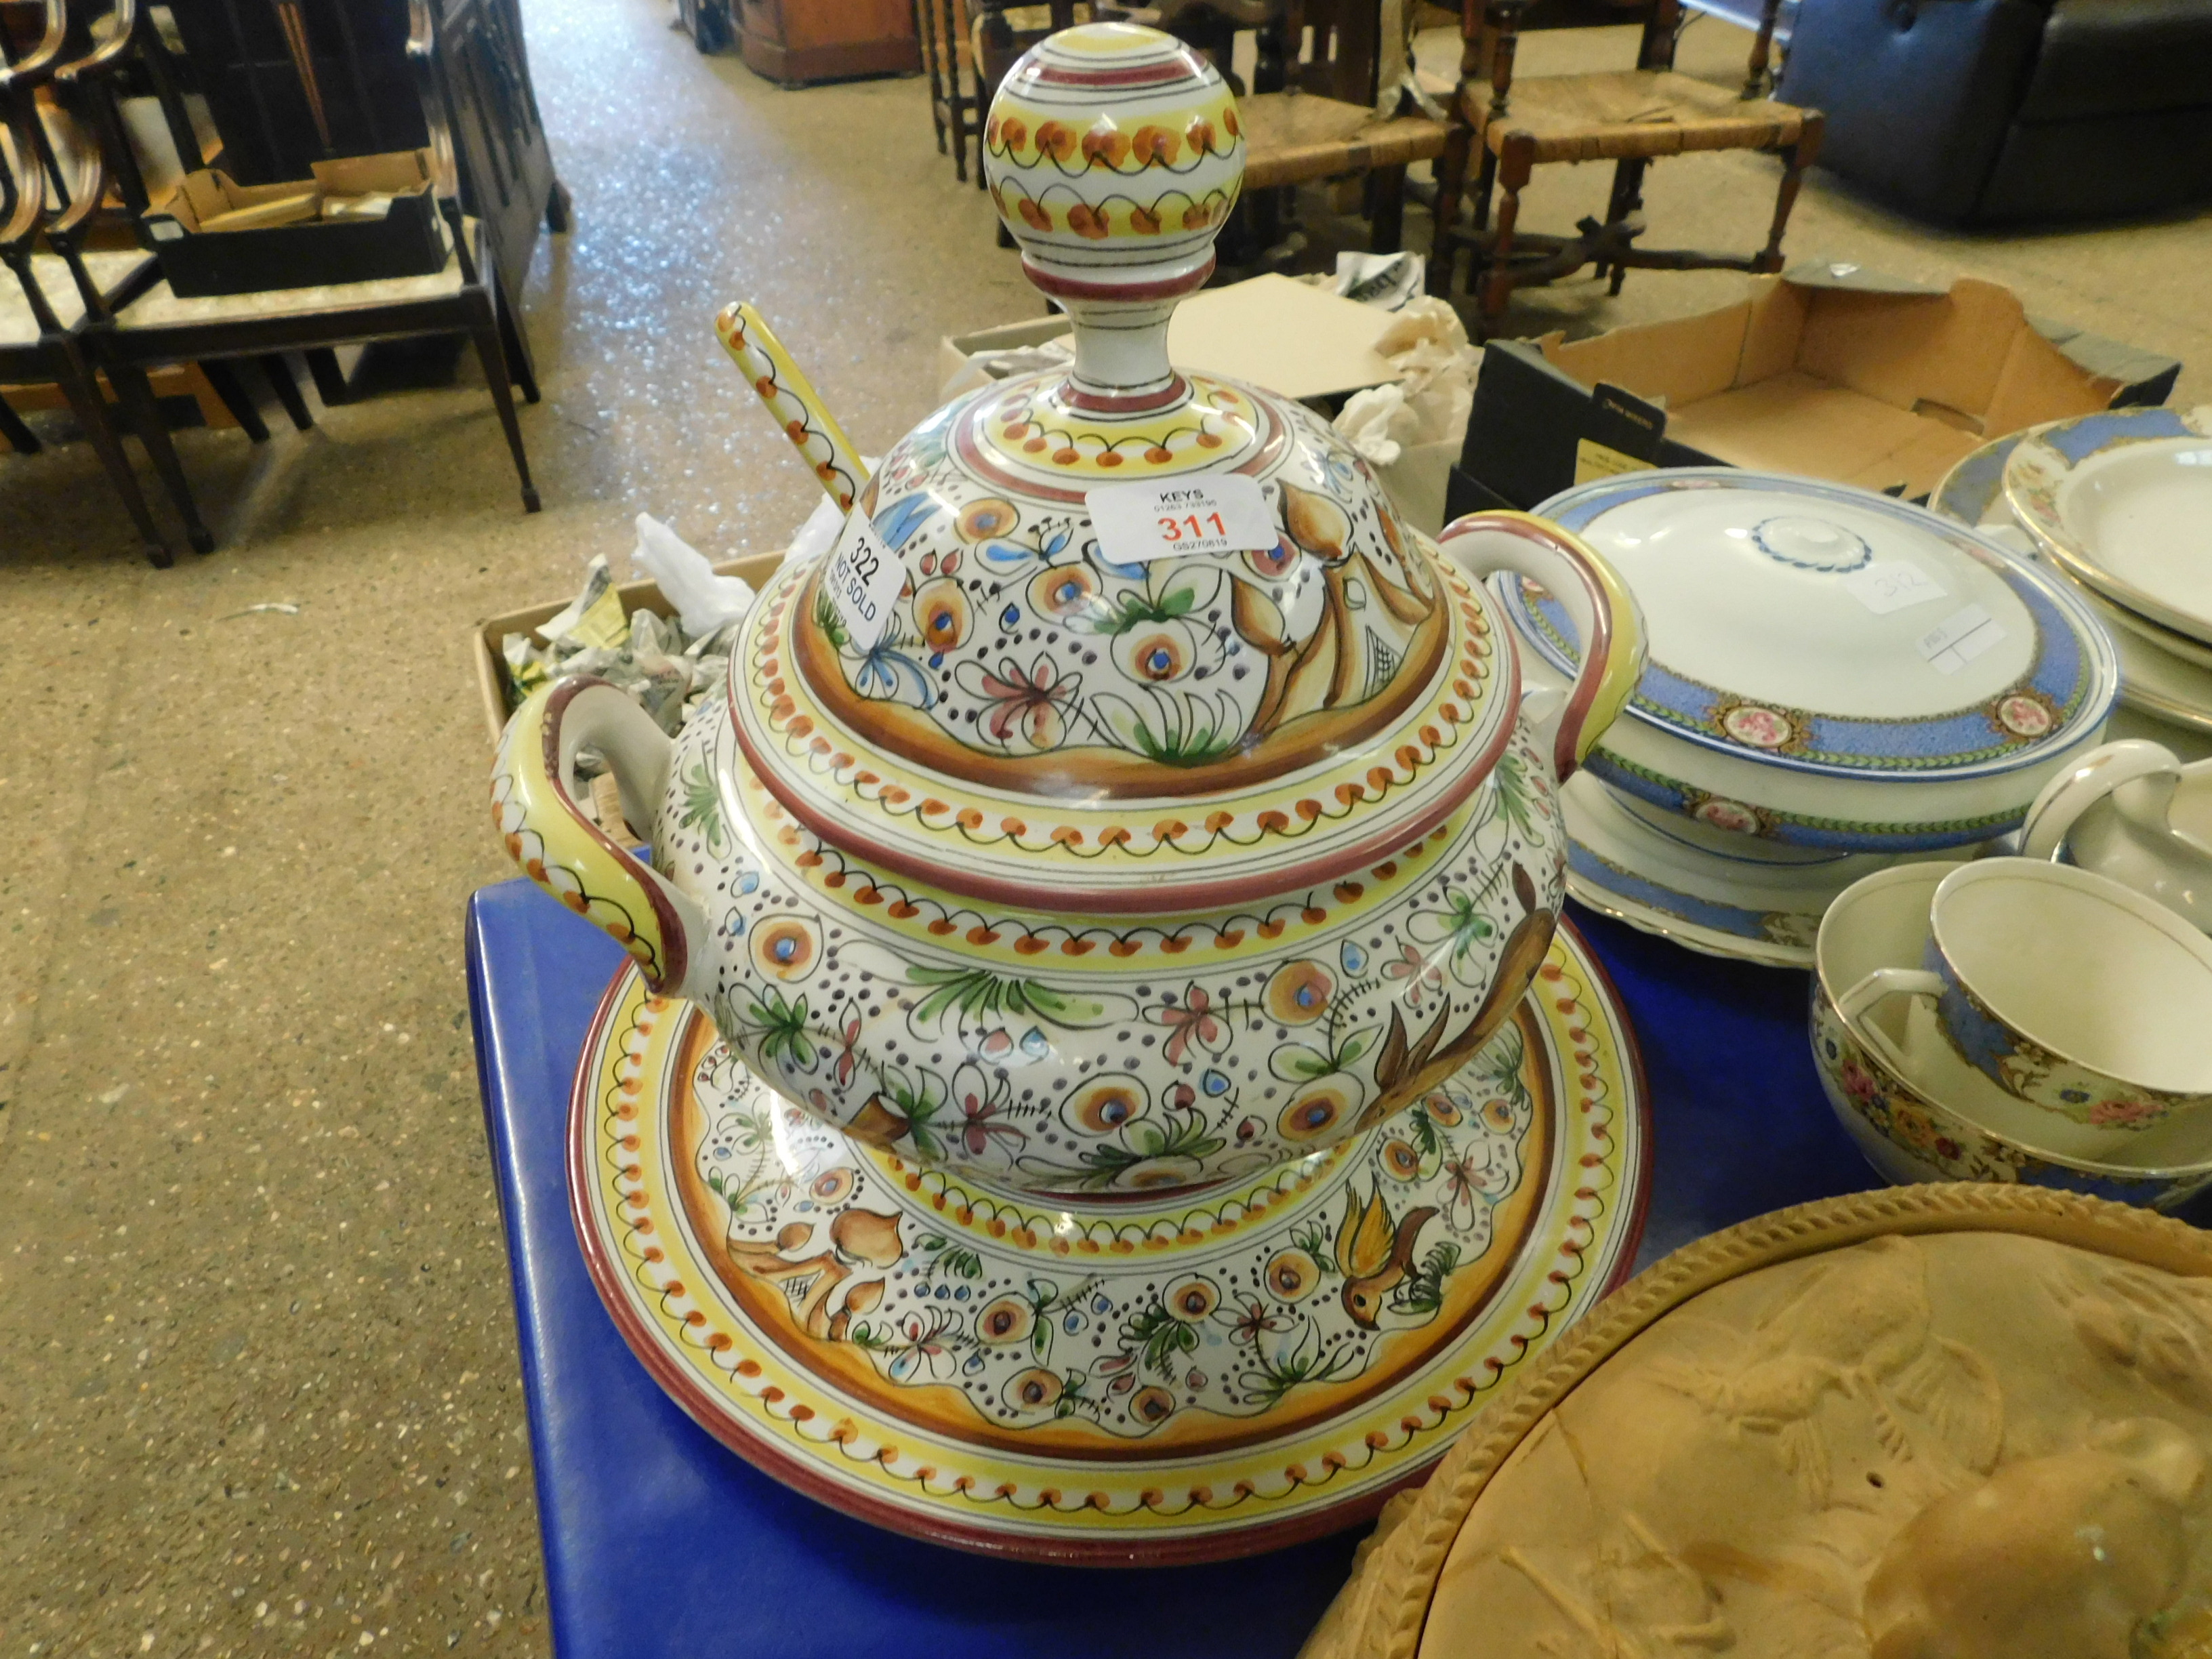 20TH CENTURY ITALIAN POTTERY COVERED TWO-HANDLED SOUP TUREEN AND STAND, WITH LADLE, 33CM HIGH